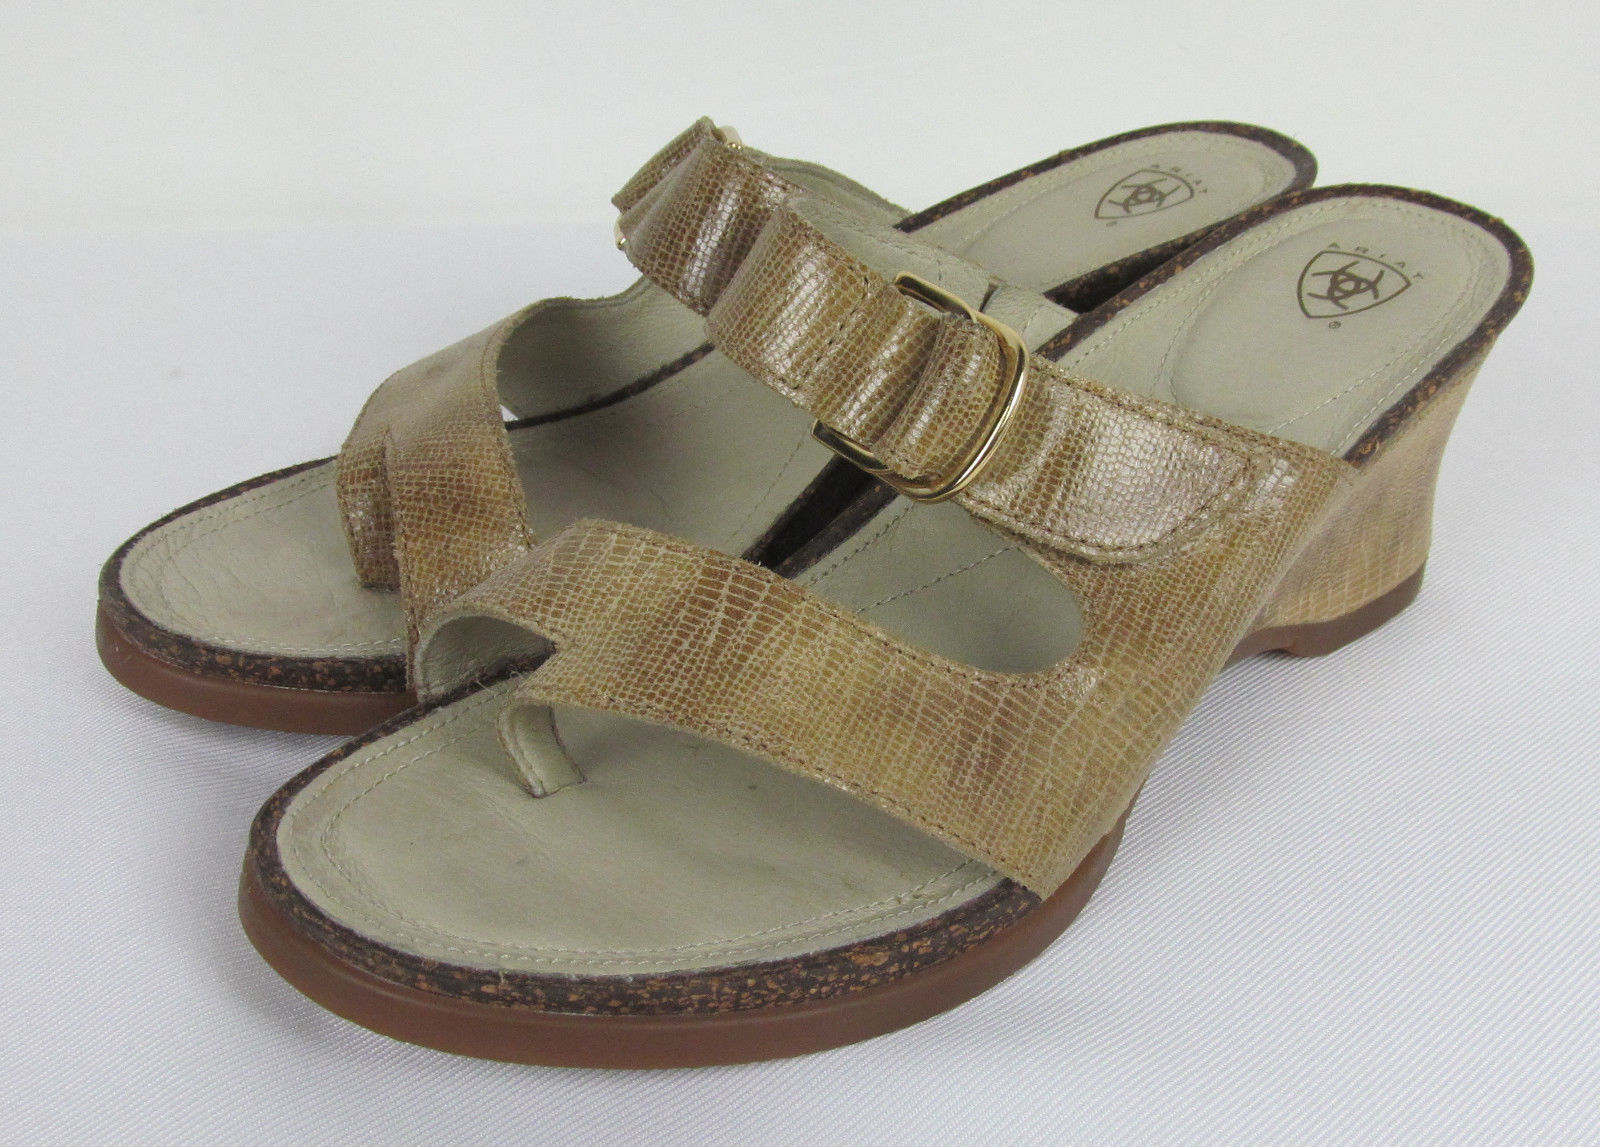 Ariat Wedge Slide Sandals shoes leather reptile pattern Tan / Beige ...